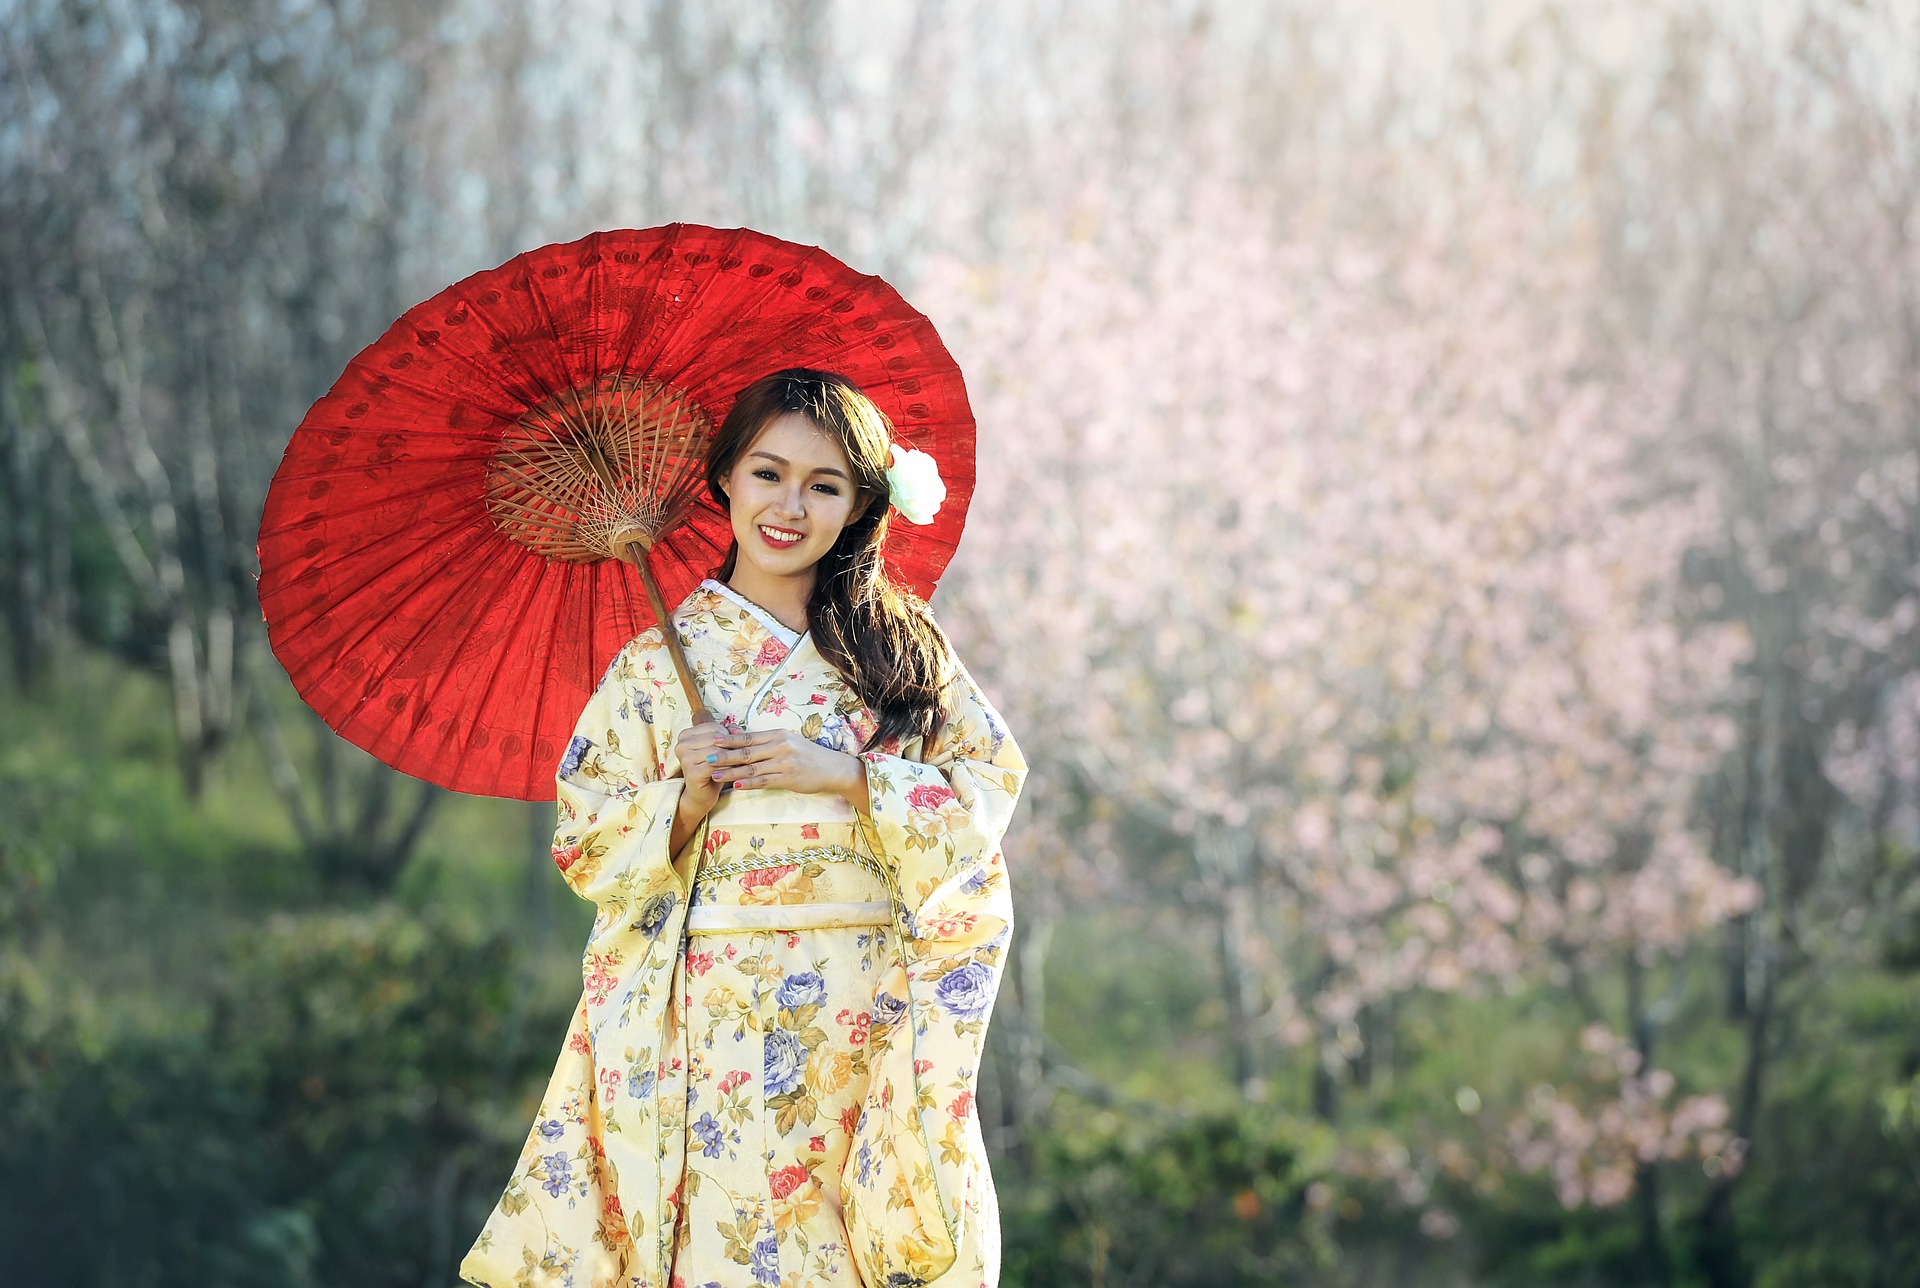 Geisha with red umbrella in front of cherry blossoms in Japan